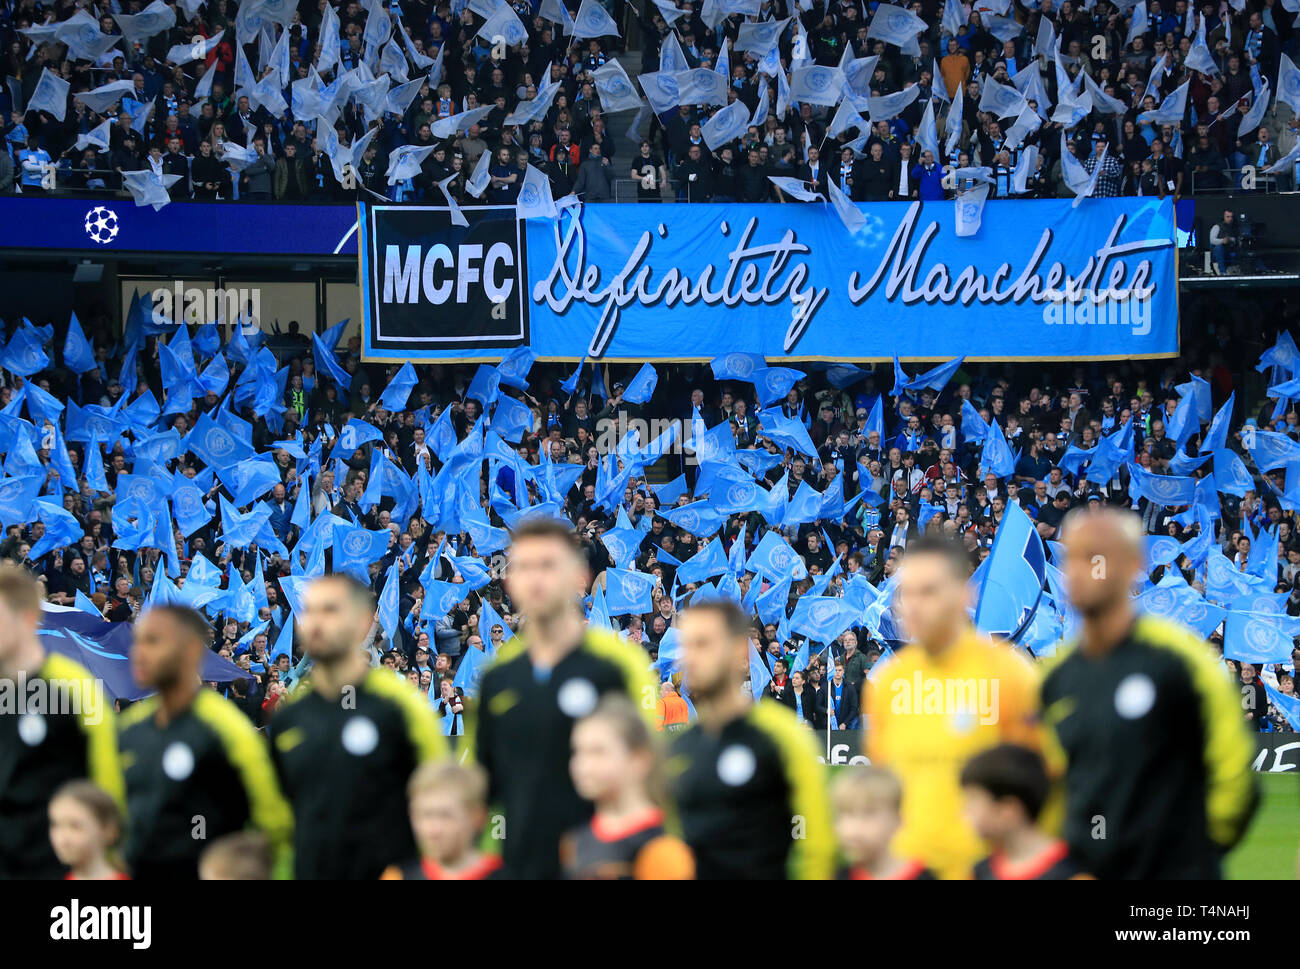 Manchester City fans wave flags ahead of kick-off near a banner that reads 'MCFC Definitely Manchester' during the UEFA Champions League quarter final second leg match at the Etihad Stadium, Manchester. Stock Photo